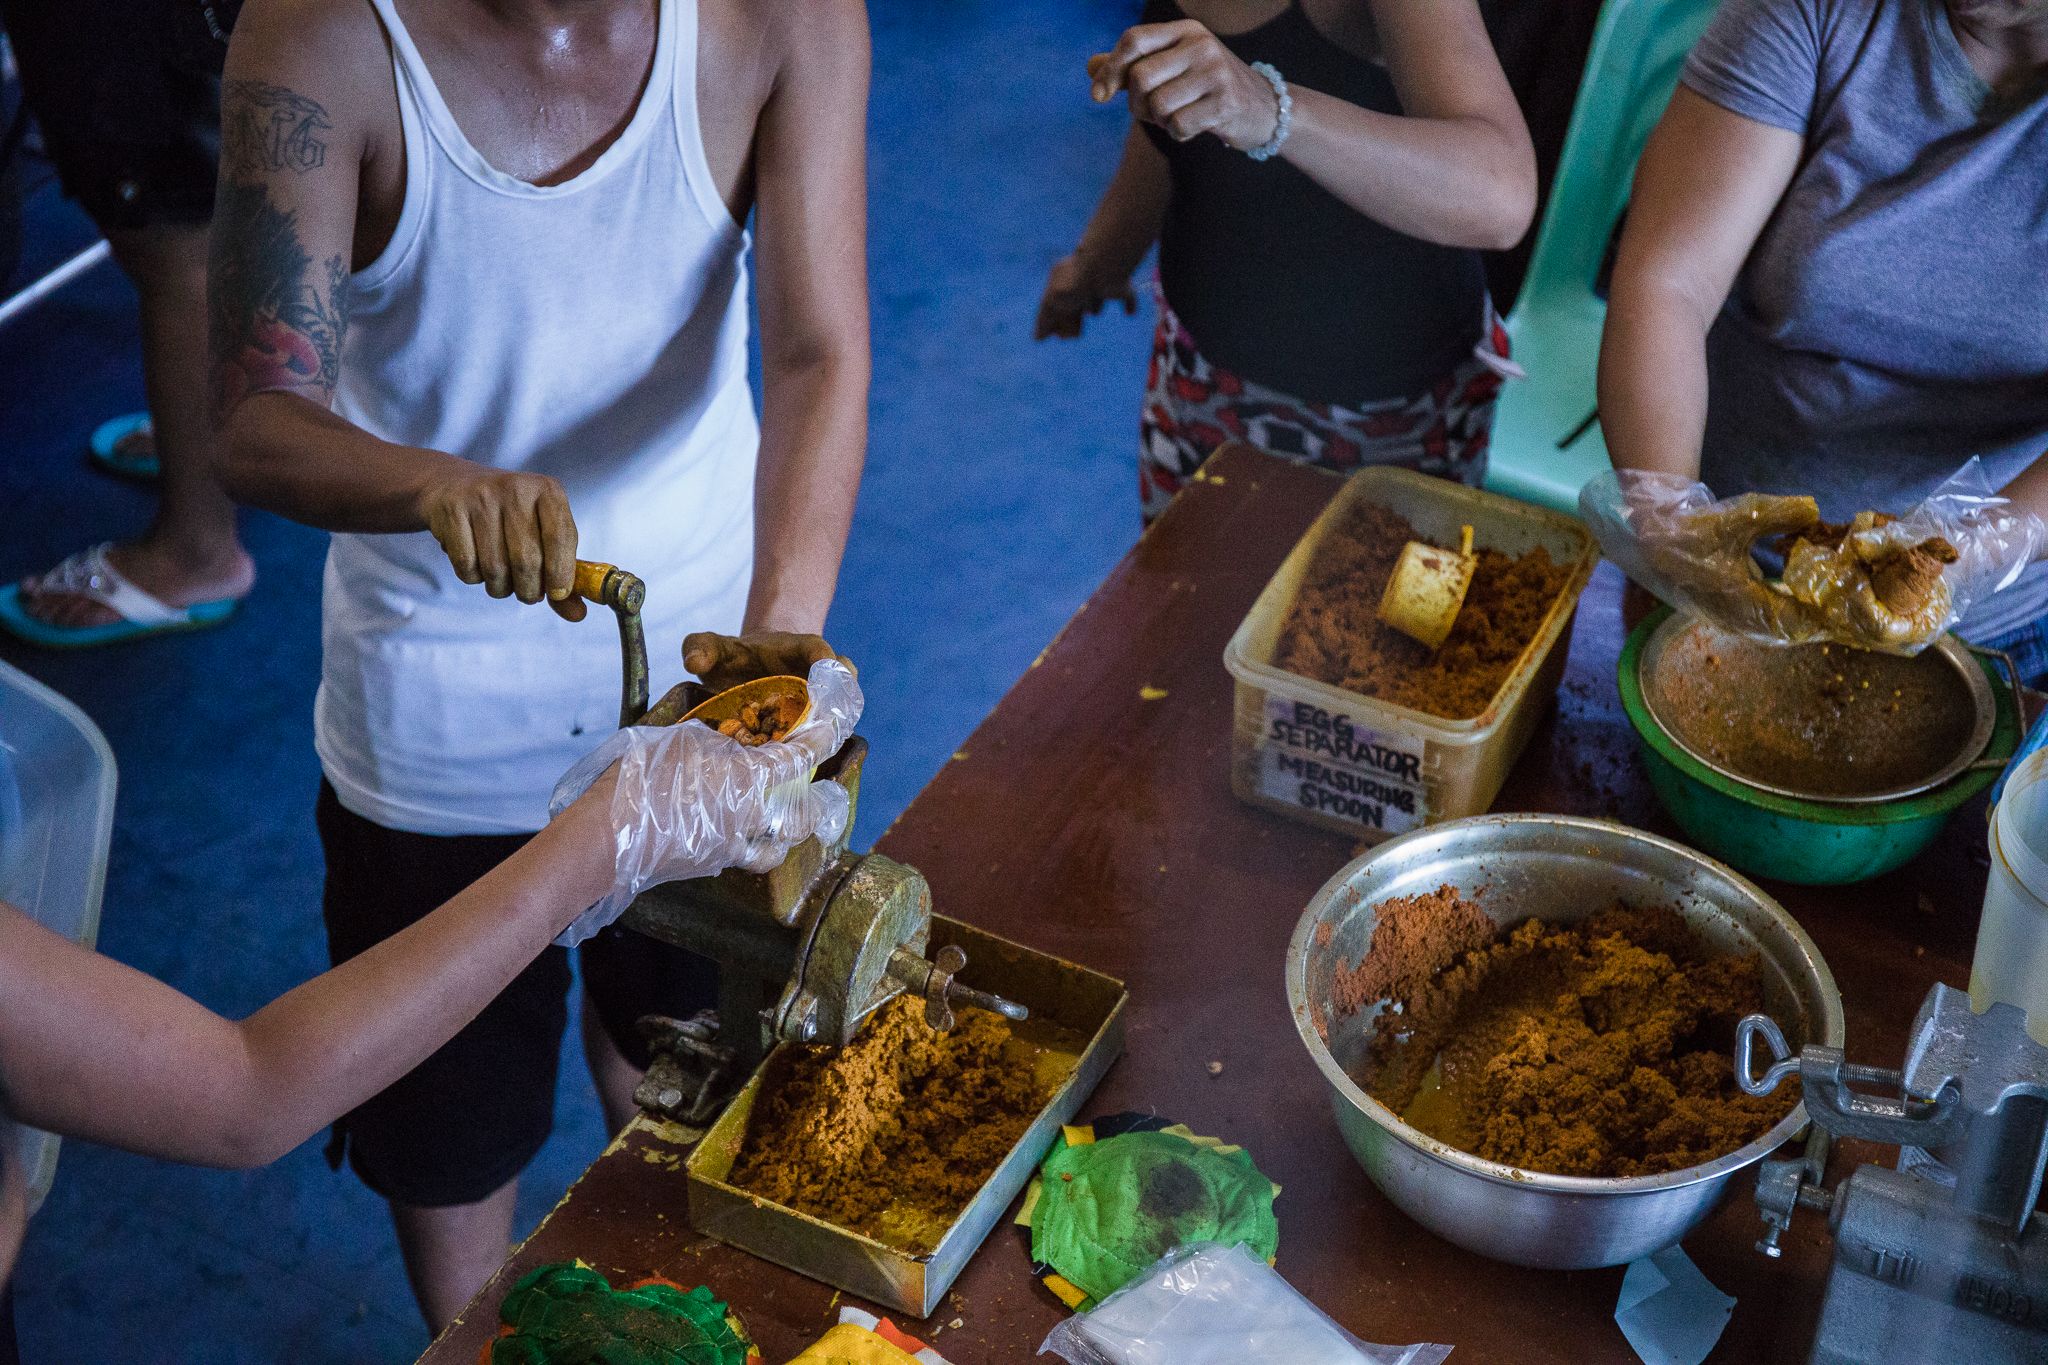 Rise Up organizers teach surviving family members of drug war victims how to make turmeric powder, which they can sell in order to support their families. Image by Pat Nabong. Philippines, 2017.